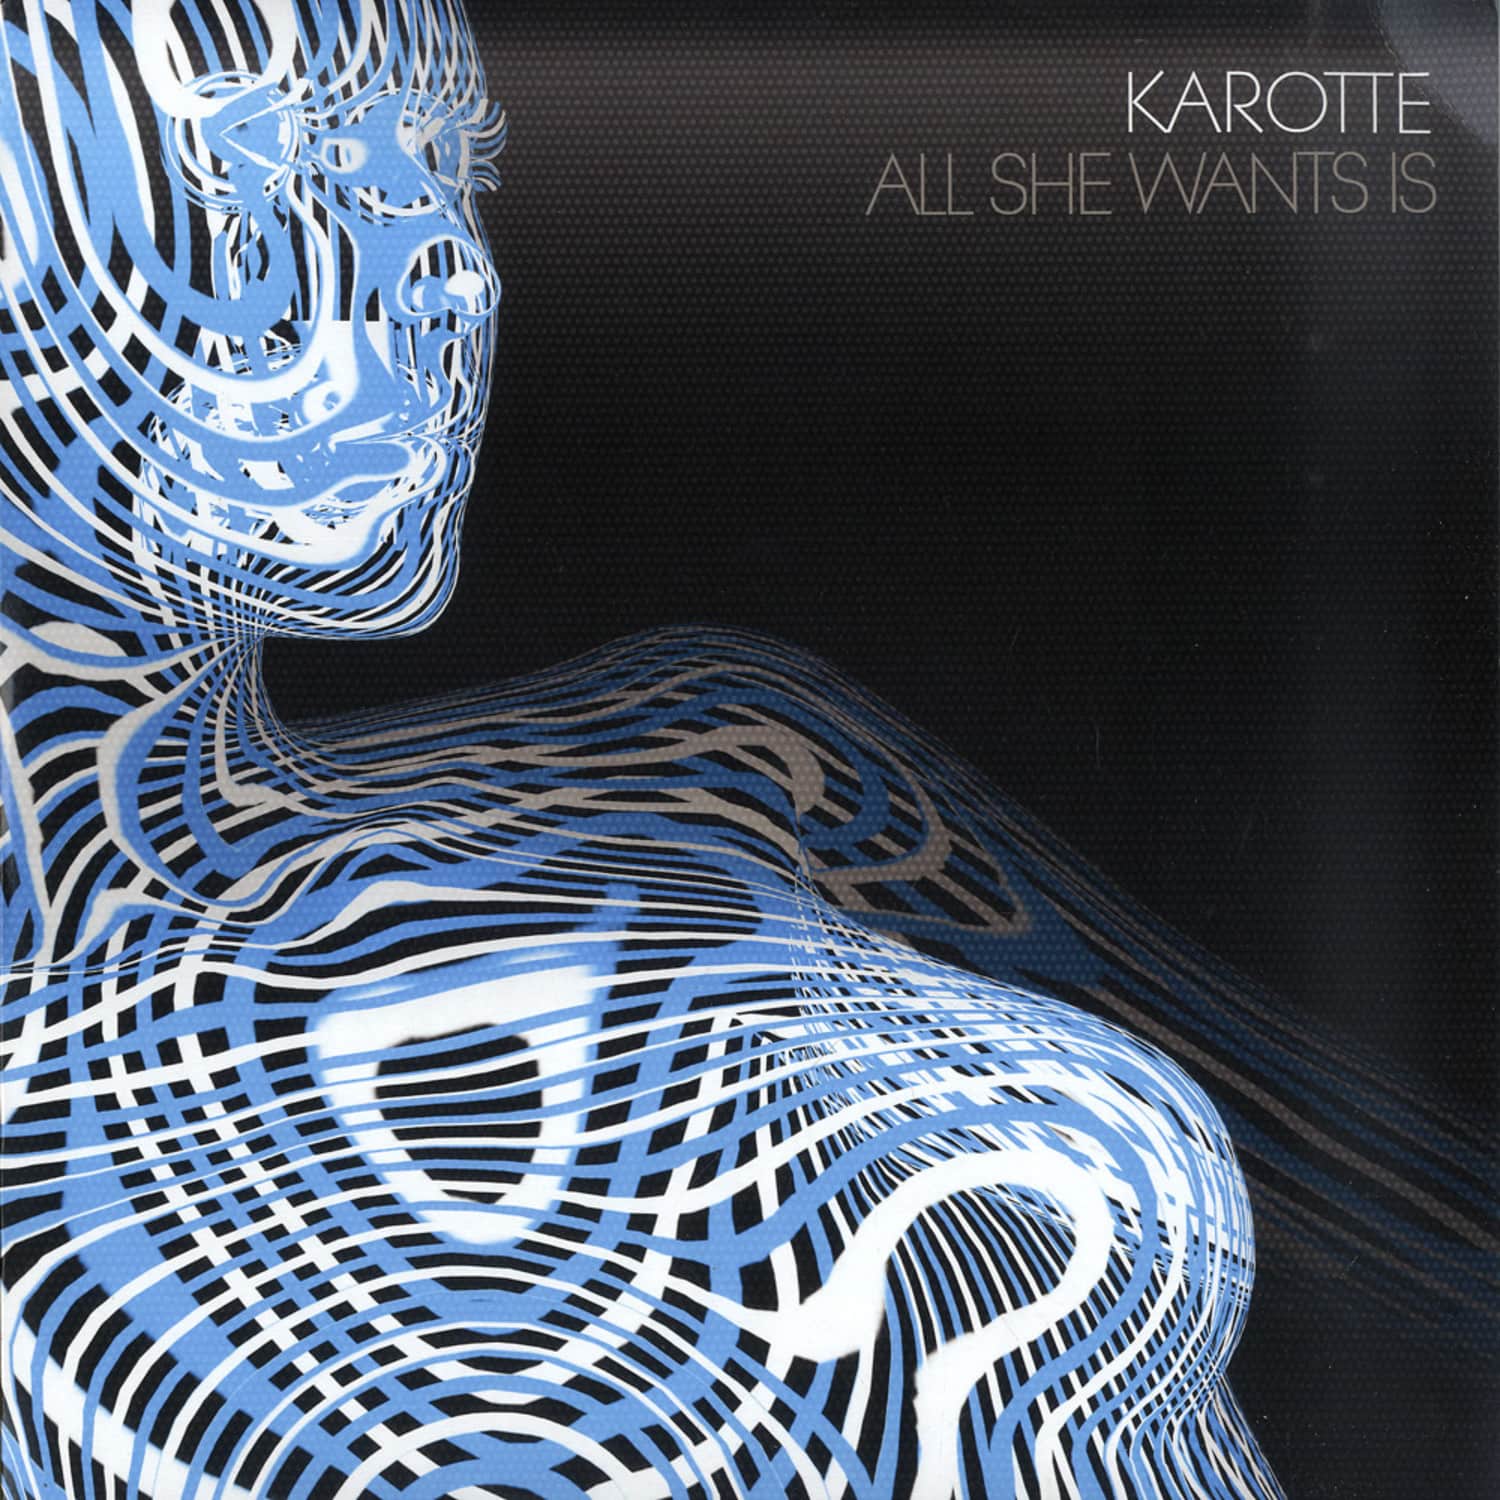 Karotte - ALL SHE WANTS IS